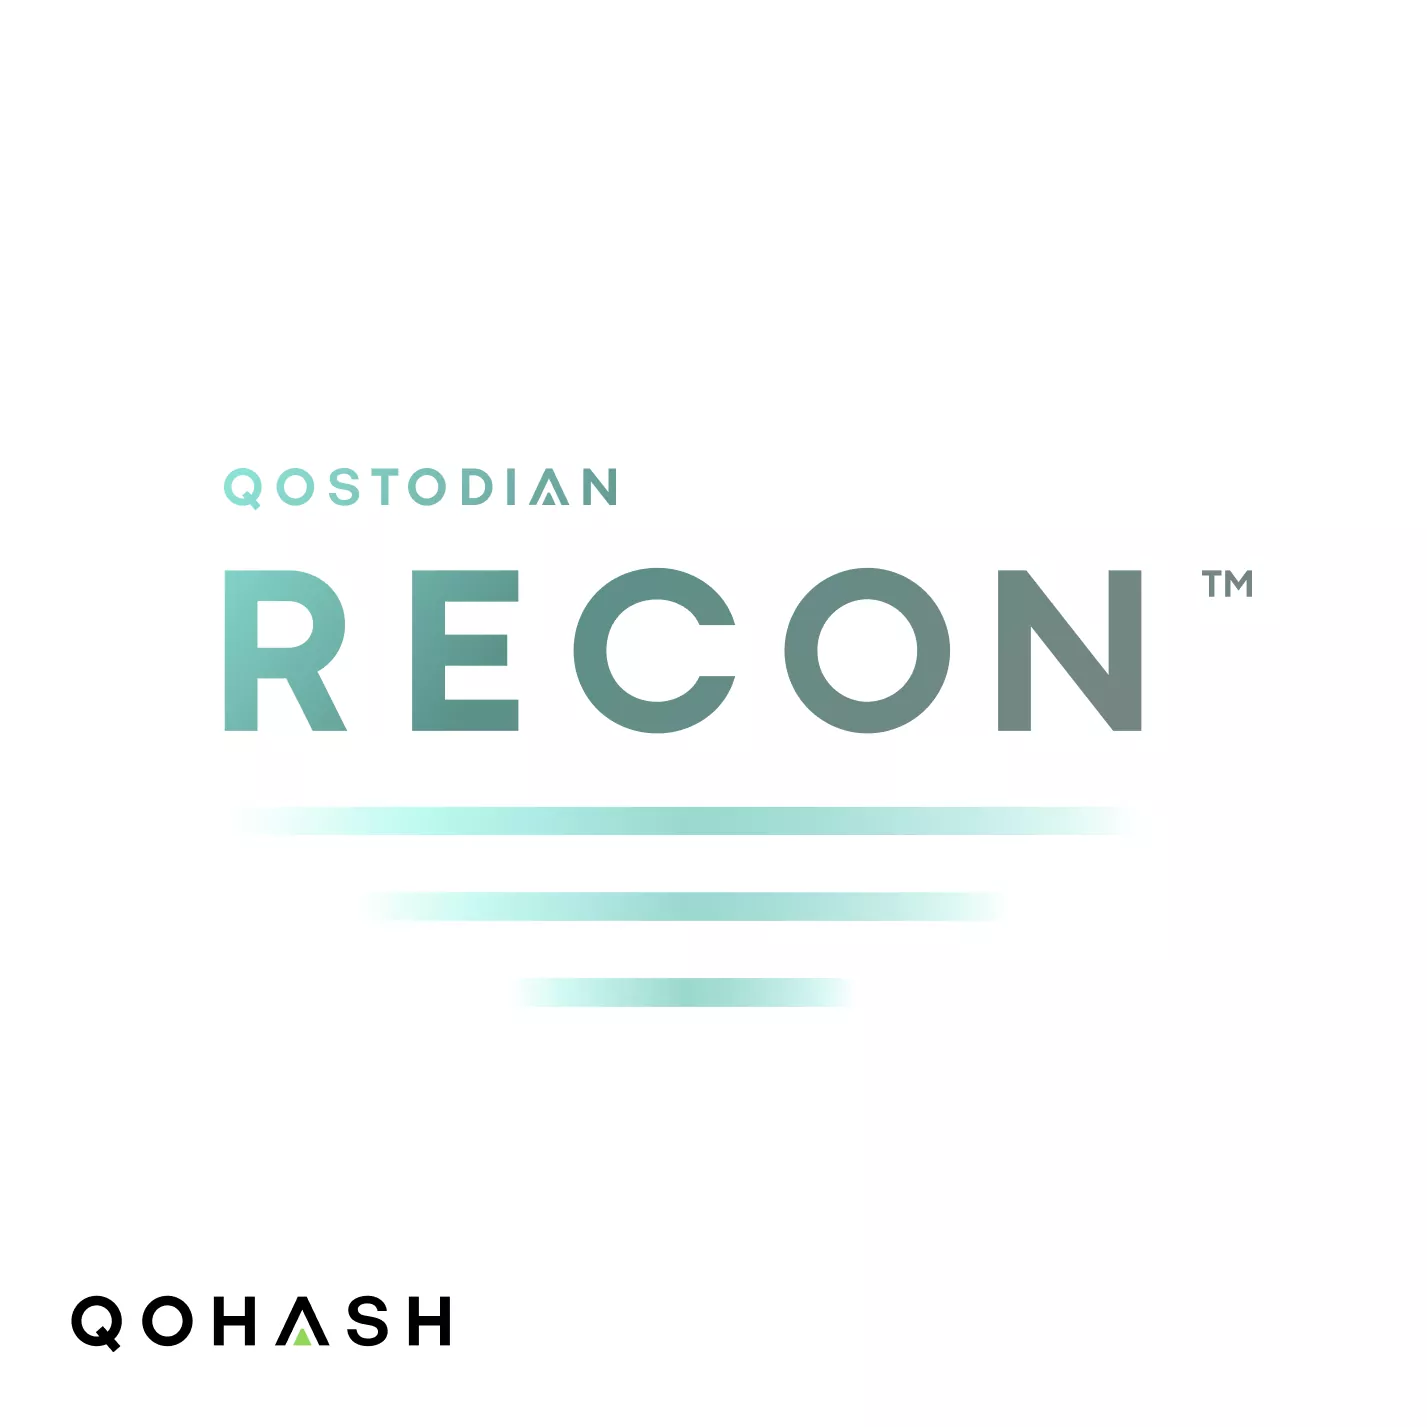 Qohash Launches New Qostodian Recon™ Product to Help Organizations Discover and Secure Their Sensitive Data